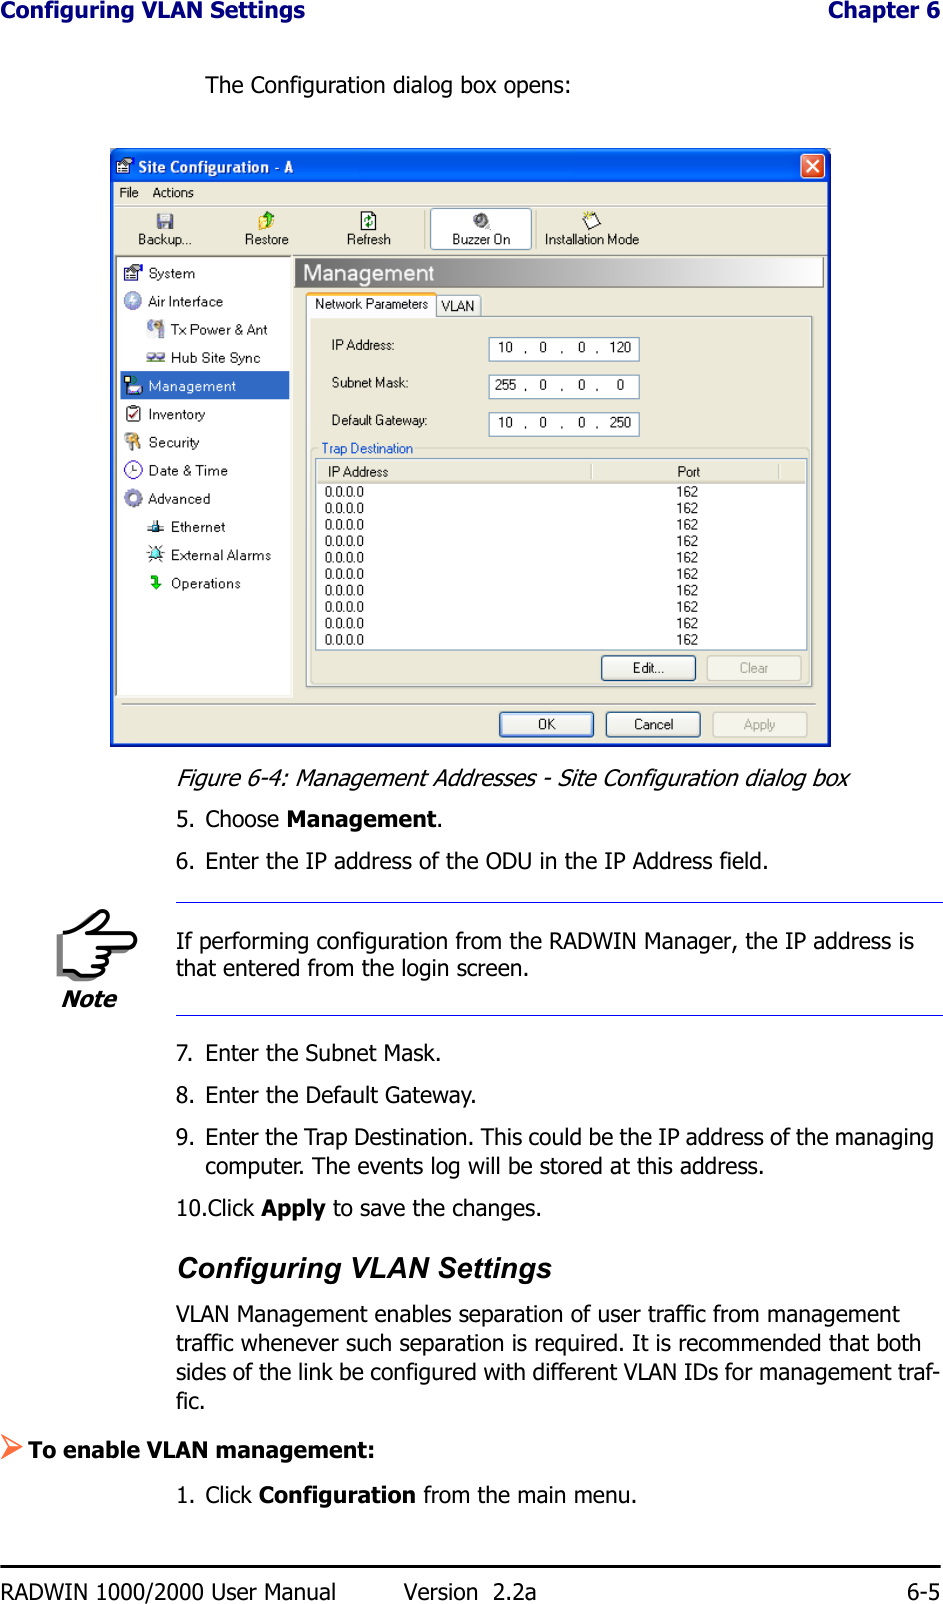 Configuring VLAN Settings  Chapter 6RADWIN 1000/2000 User Manual Version  2.2a 6-5The Configuration dialog box opens:Figure 6-4: Management Addresses - Site Configuration dialog box5. Choose Management.6. Enter the IP address of the ODU in the IP Address field.7. Enter the Subnet Mask.8. Enter the Default Gateway.9. Enter the Trap Destination. This could be the IP address of the managing computer. The events log will be stored at this address.10.Click Apply to save the changes.Configuring VLAN SettingsVLAN Management enables separation of user traffic from management traffic whenever such separation is required. It is recommended that both sides of the link be configured with different VLAN IDs for management traf-fic.¾To enable VLAN management:1. Click Configuration from the main menu.NoteIf performing configuration from the RADWIN Manager, the IP address is that entered from the login screen.